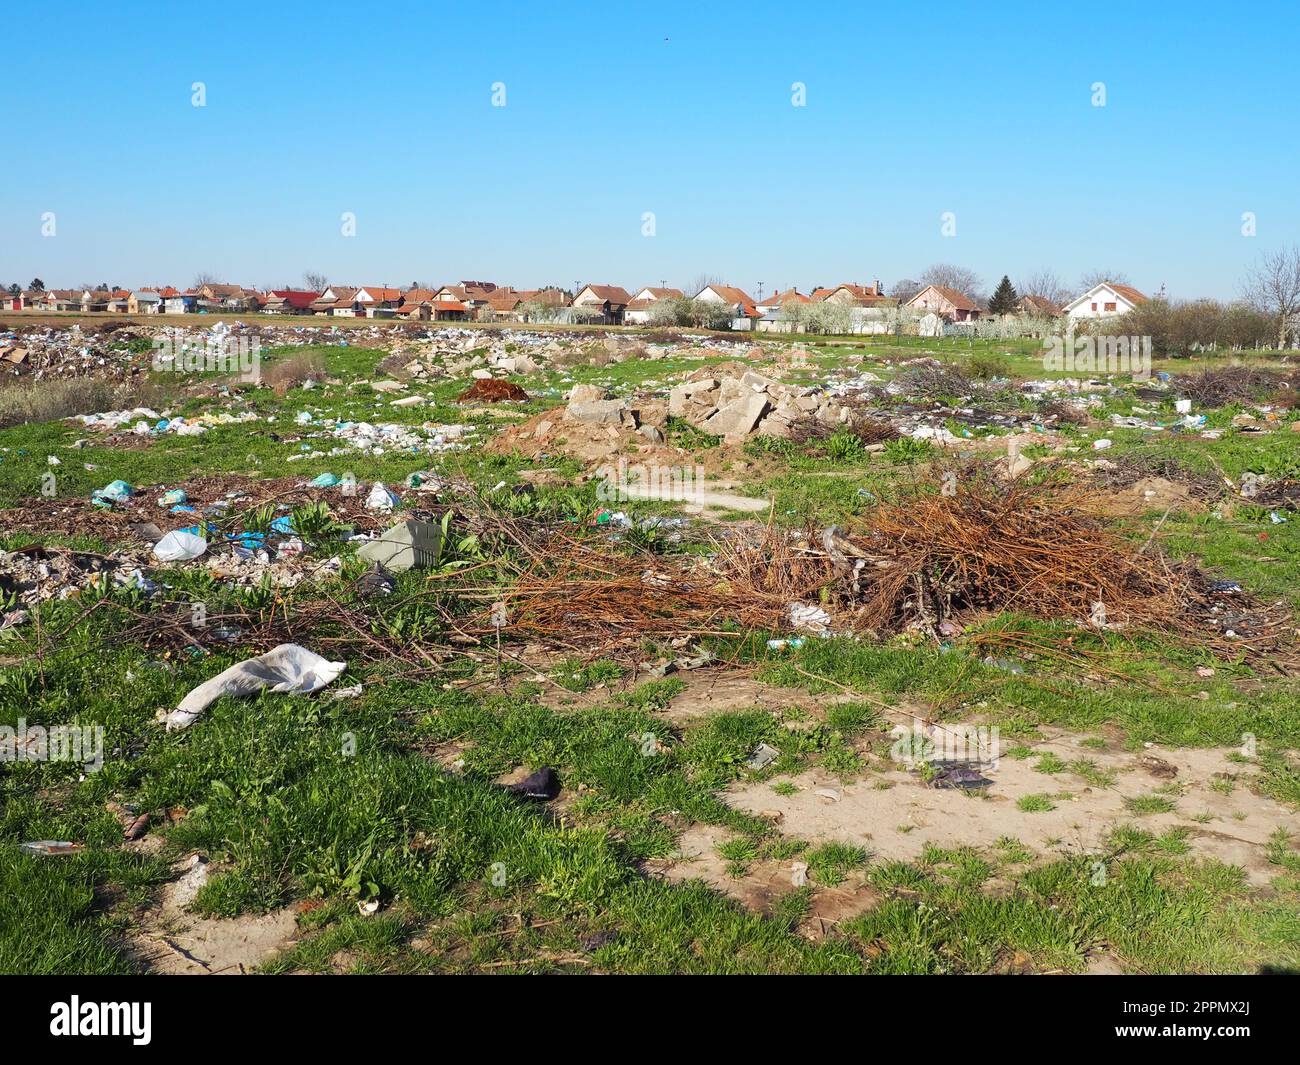 garbage dump near the village. Chaotic unofficial dump. Plastic, bags, paper, glass, biological waste. Green grass next to dirt. Ecological catastrophy. Stock Photo